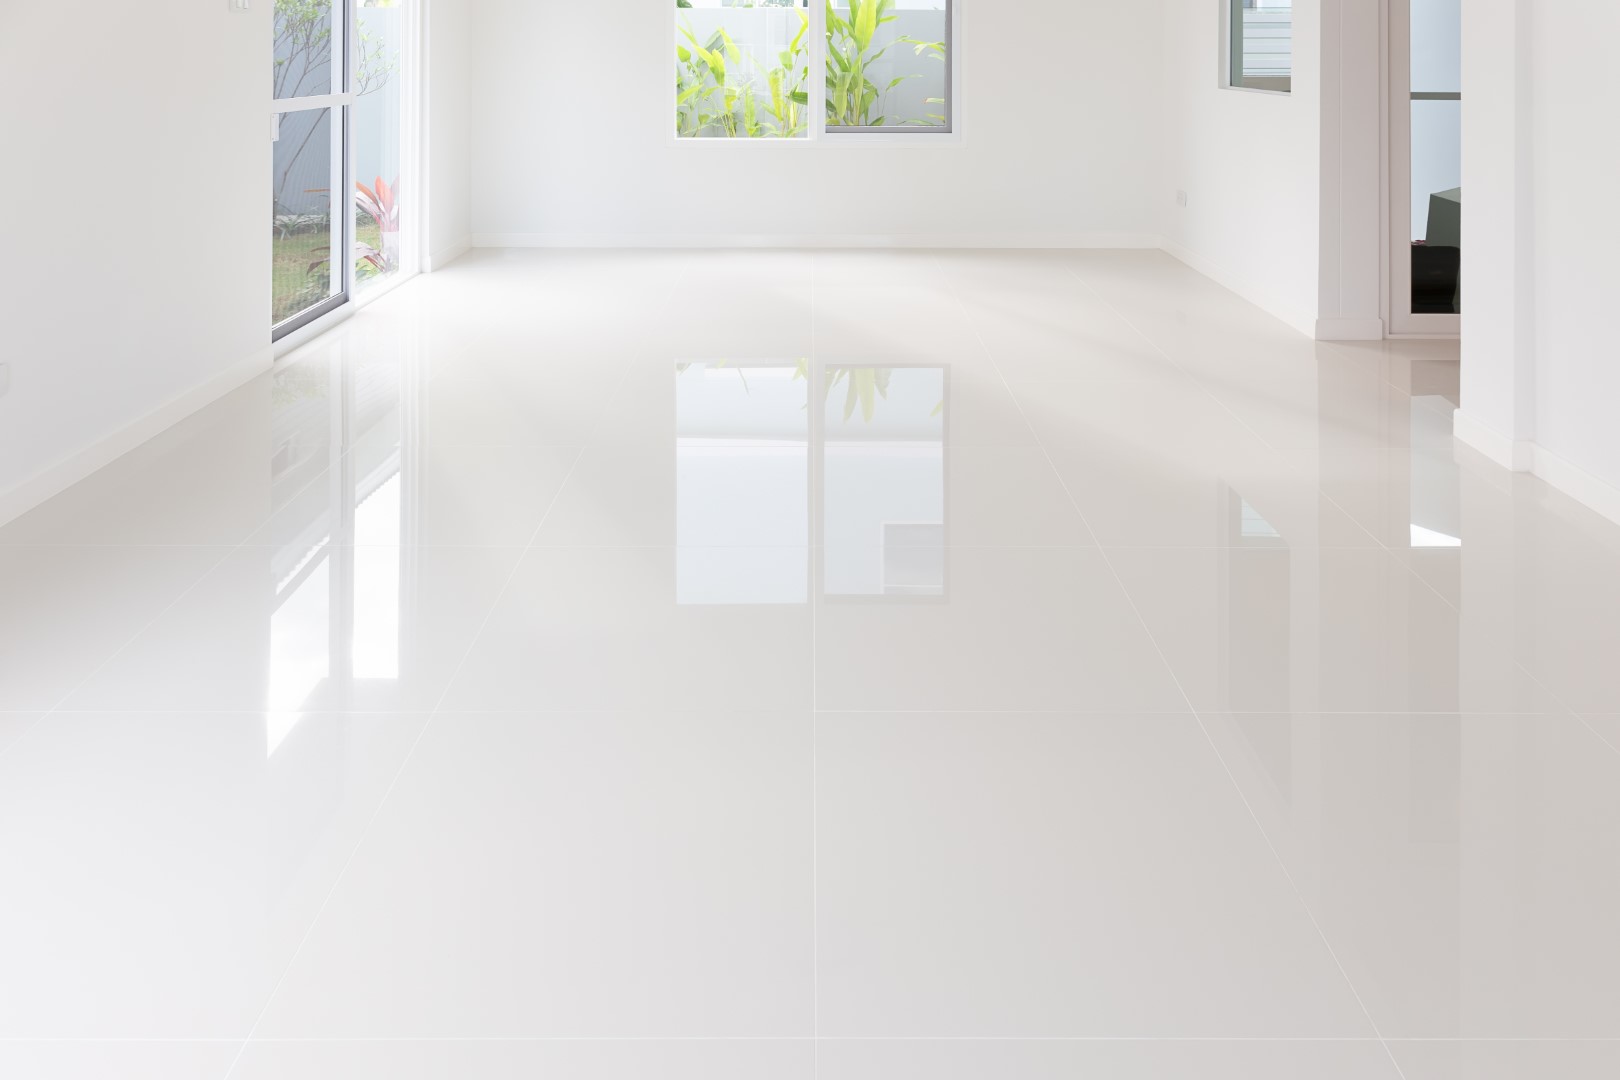 White tile floor clean condition with grid line for background.